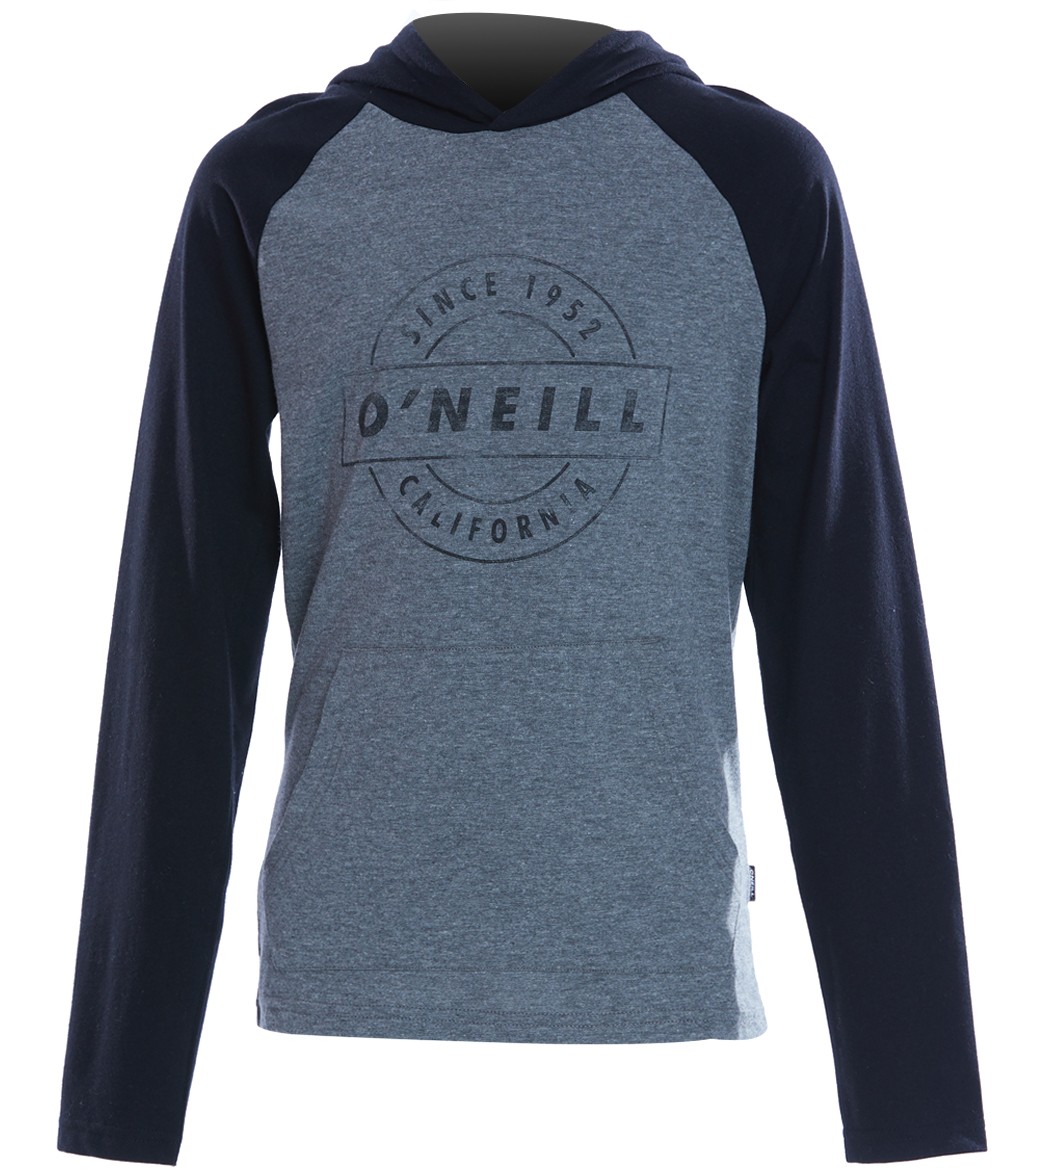 O'neill Boys' Mateo Pullover Hoody Big Kid - Heather Grey 2T Cotton/Polyester - Swimoutlet.com